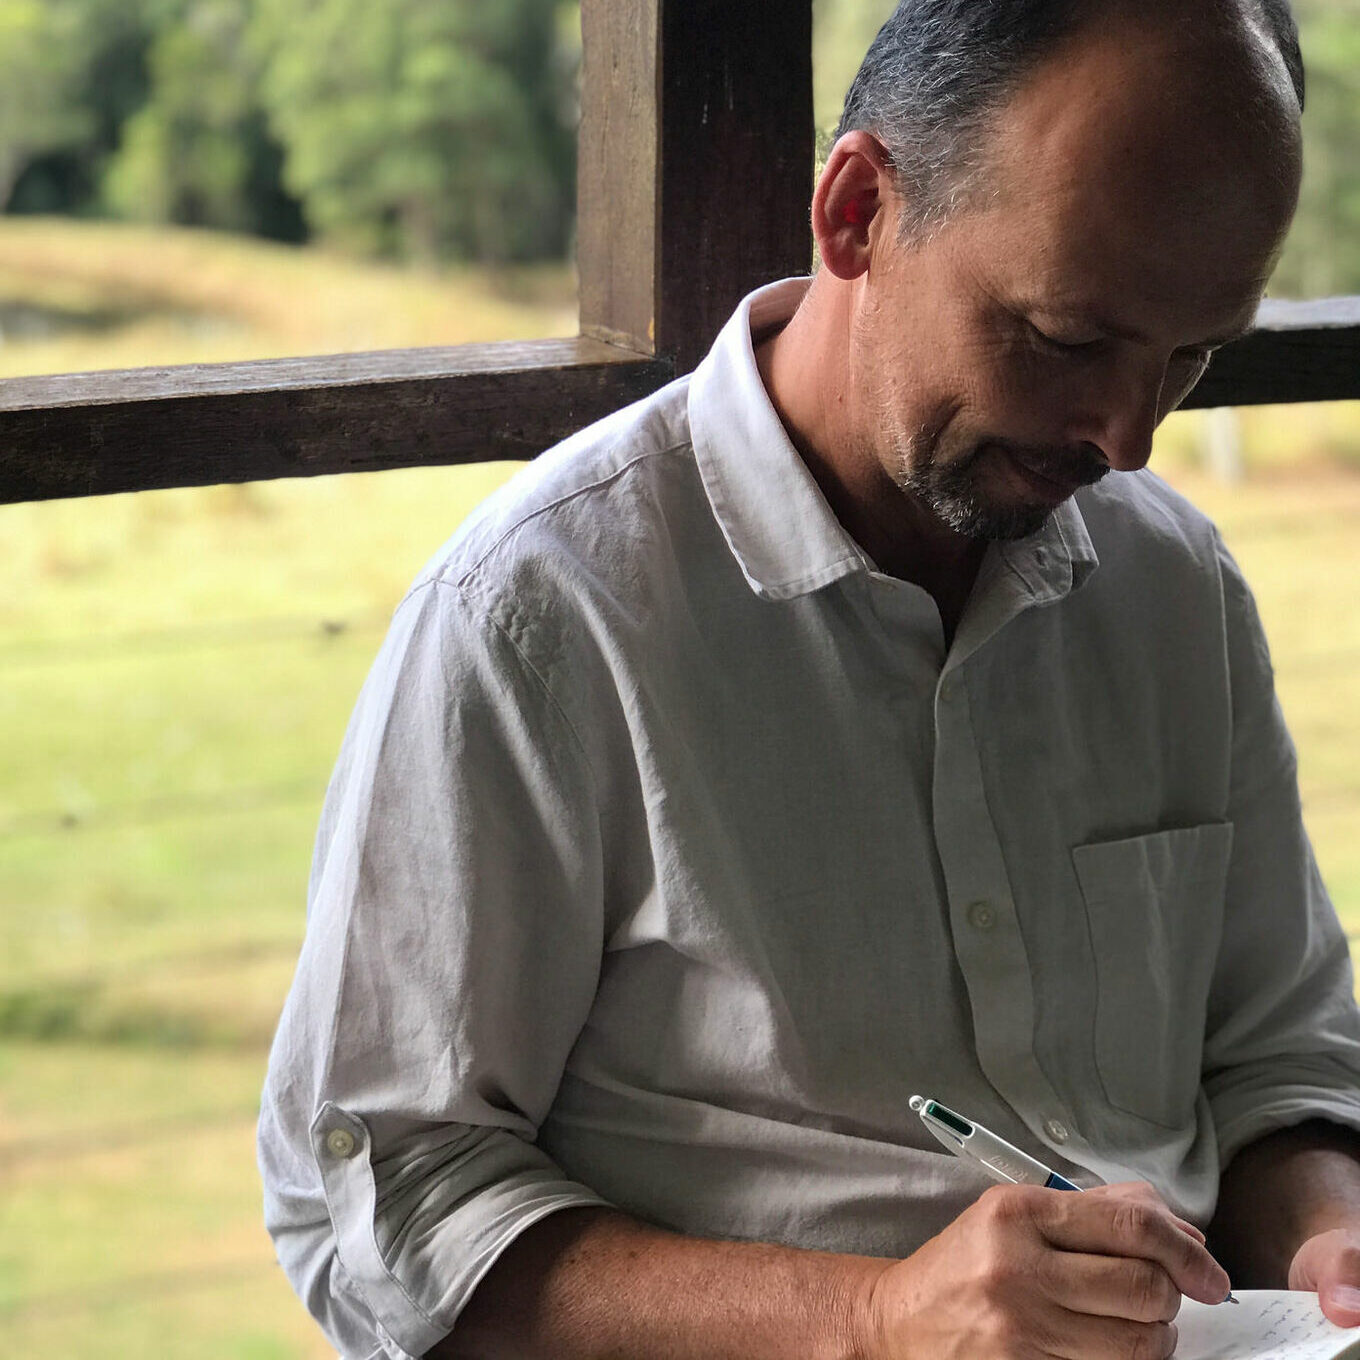 tenneson woolf in light grey shirt looking down and writing with pen on paper in front of brown fence and green pasture